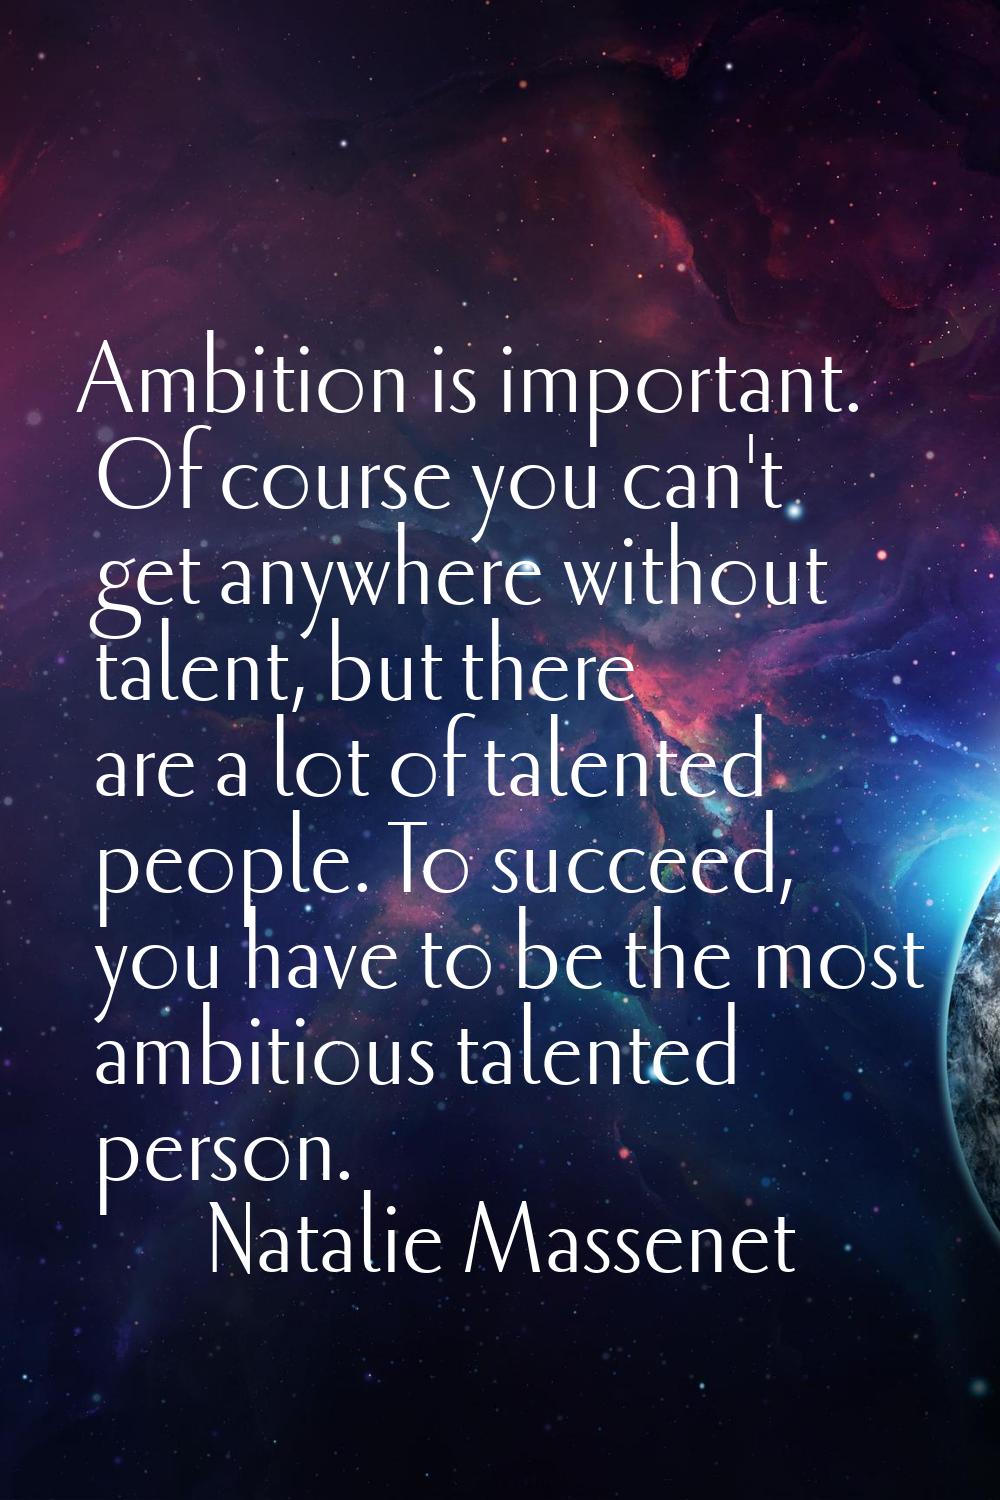 Ambition is important. Of course you can't get anywhere without talent, but there are a lot of tale